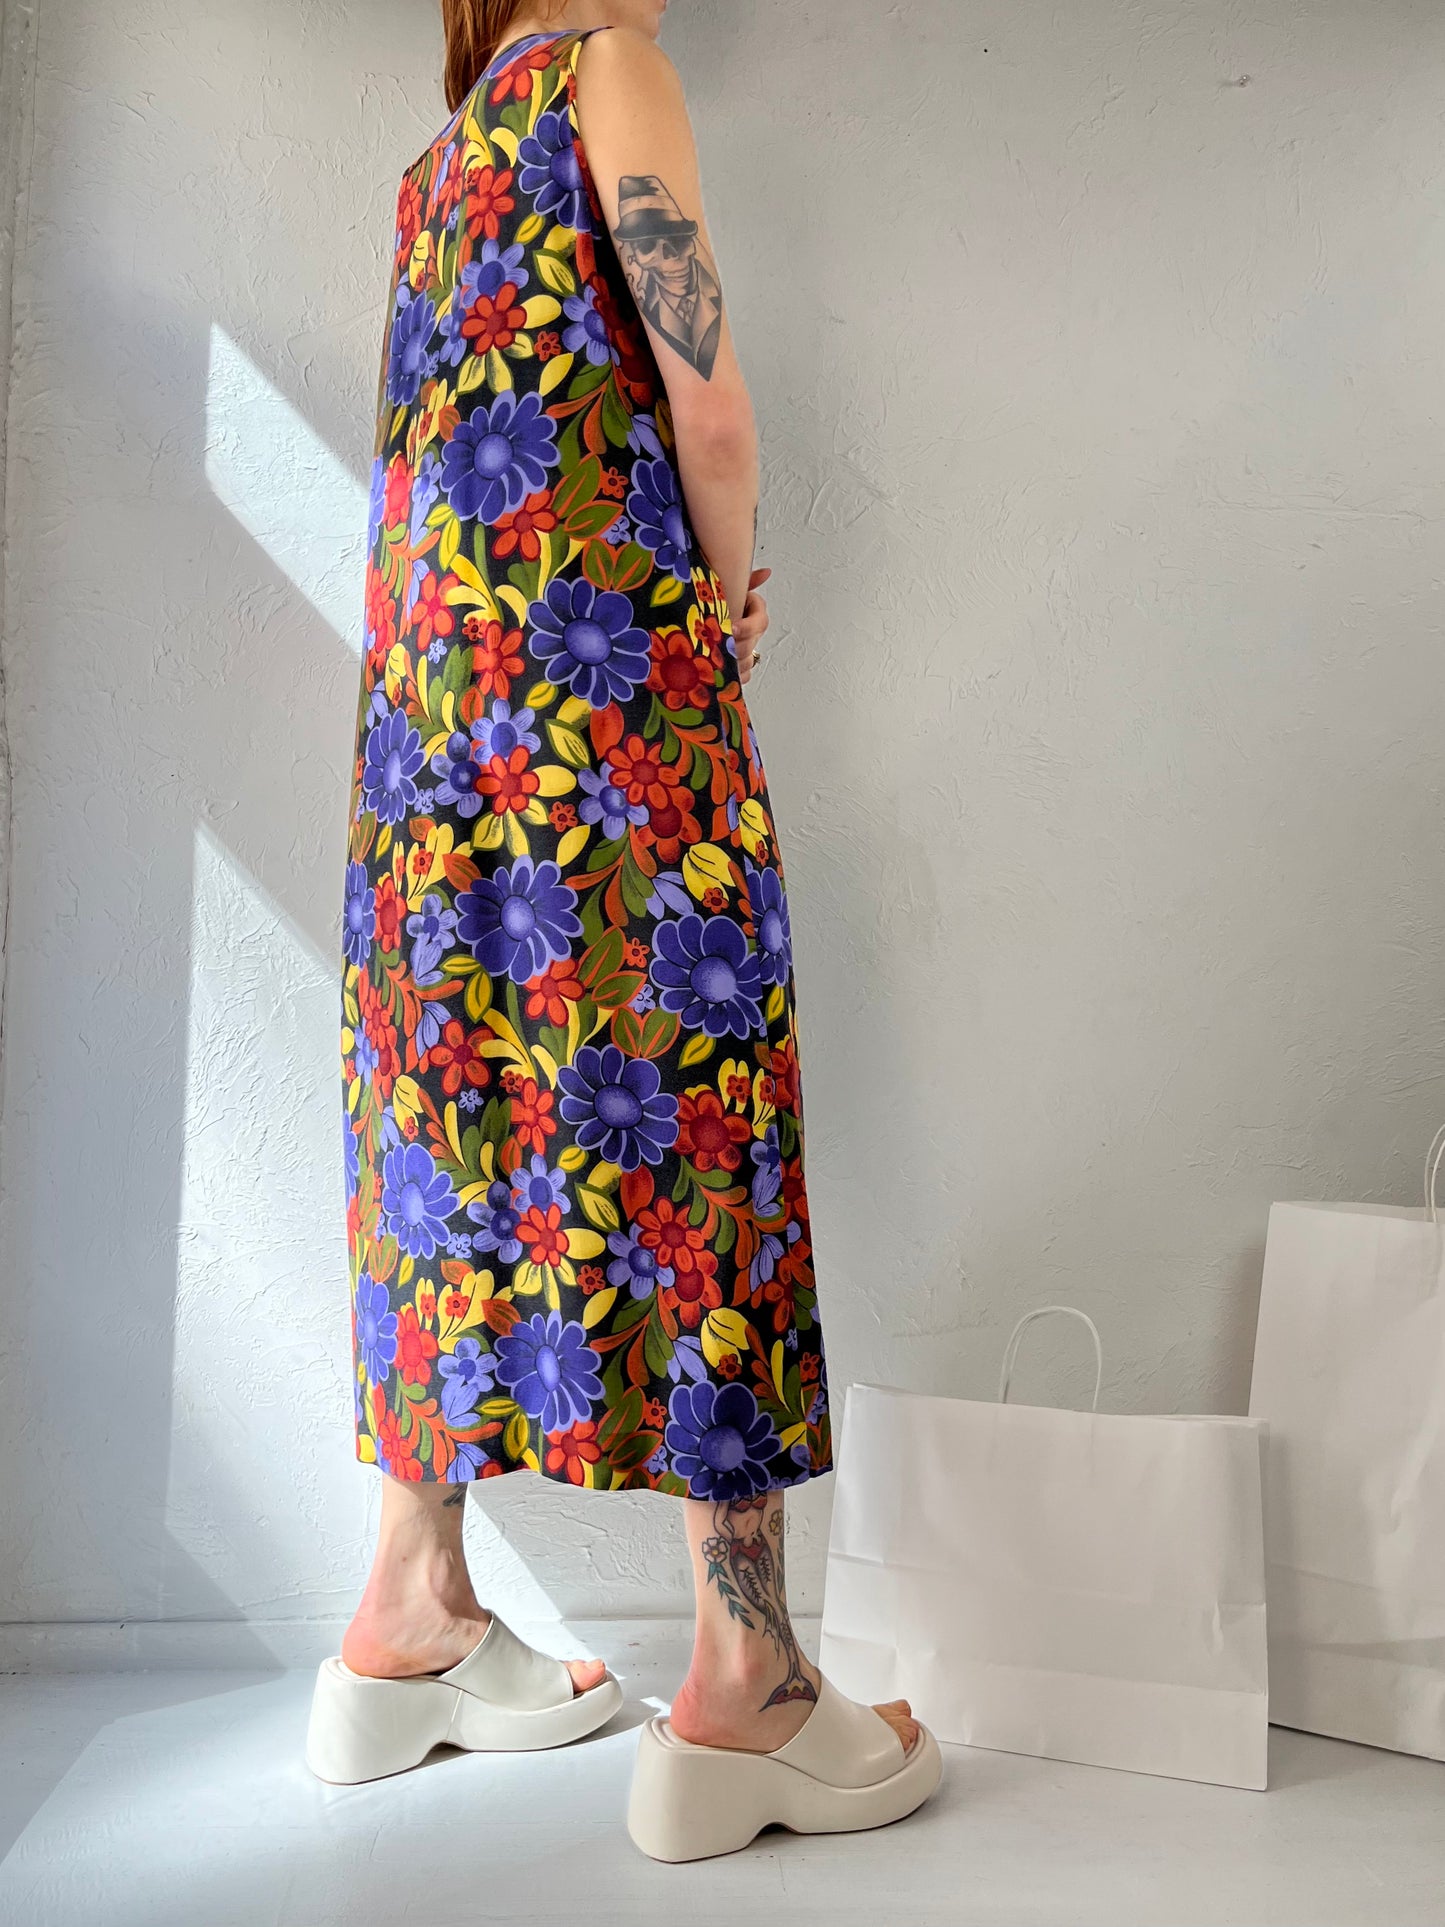 90s 'Orchid' Sleeveless Retro Floral Print Dress / Large